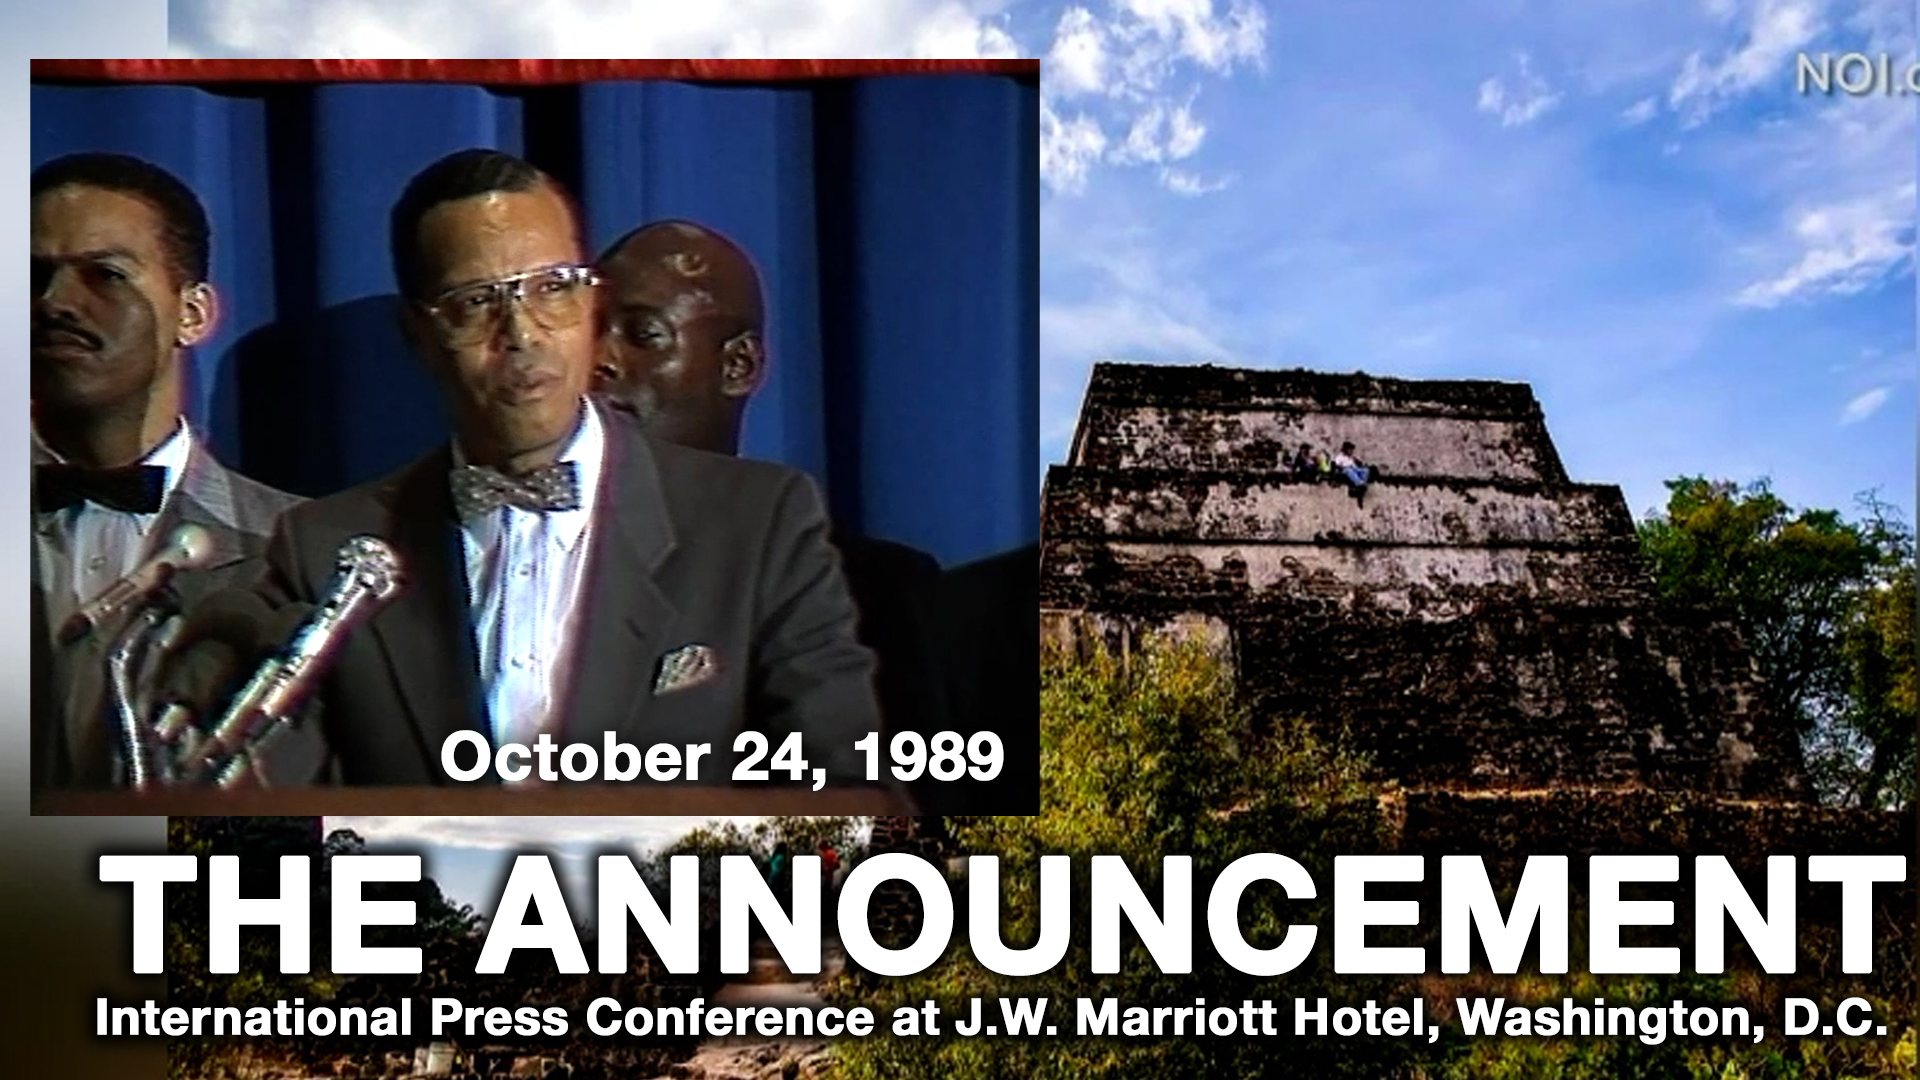 The Announcement: Minister Farrakhan Speaks On His More Than A Vision Experience